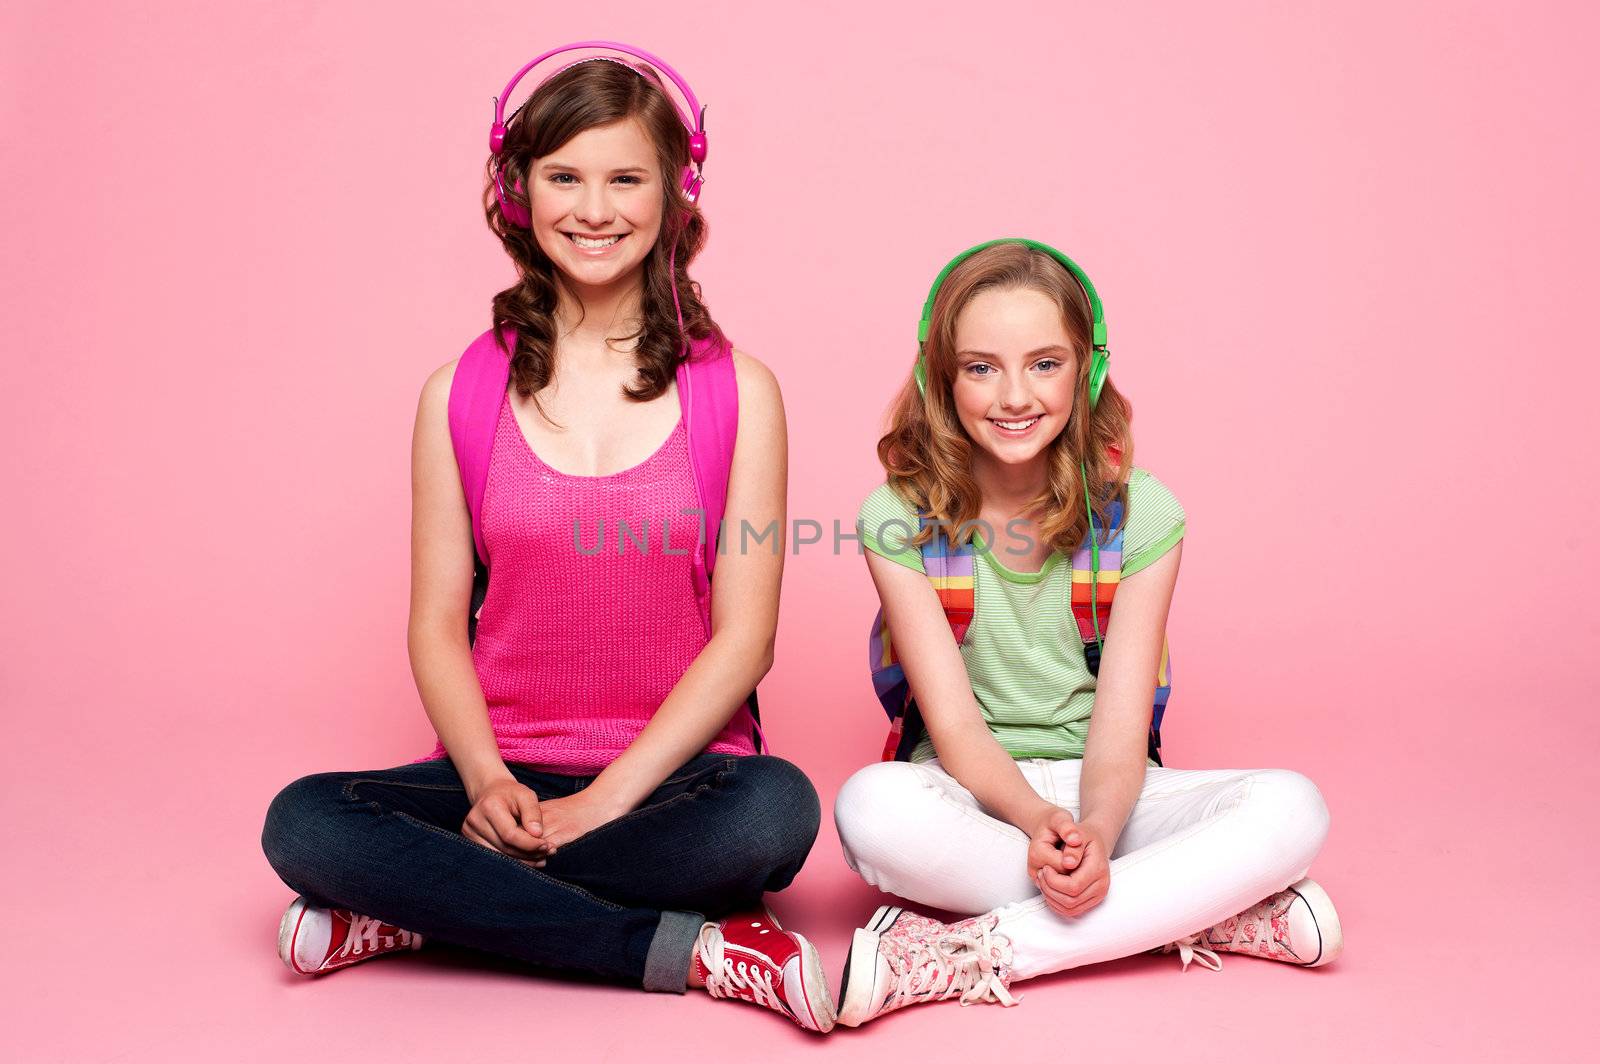 Two school friends sitting on studio floor. Carrying school bag and listening to music